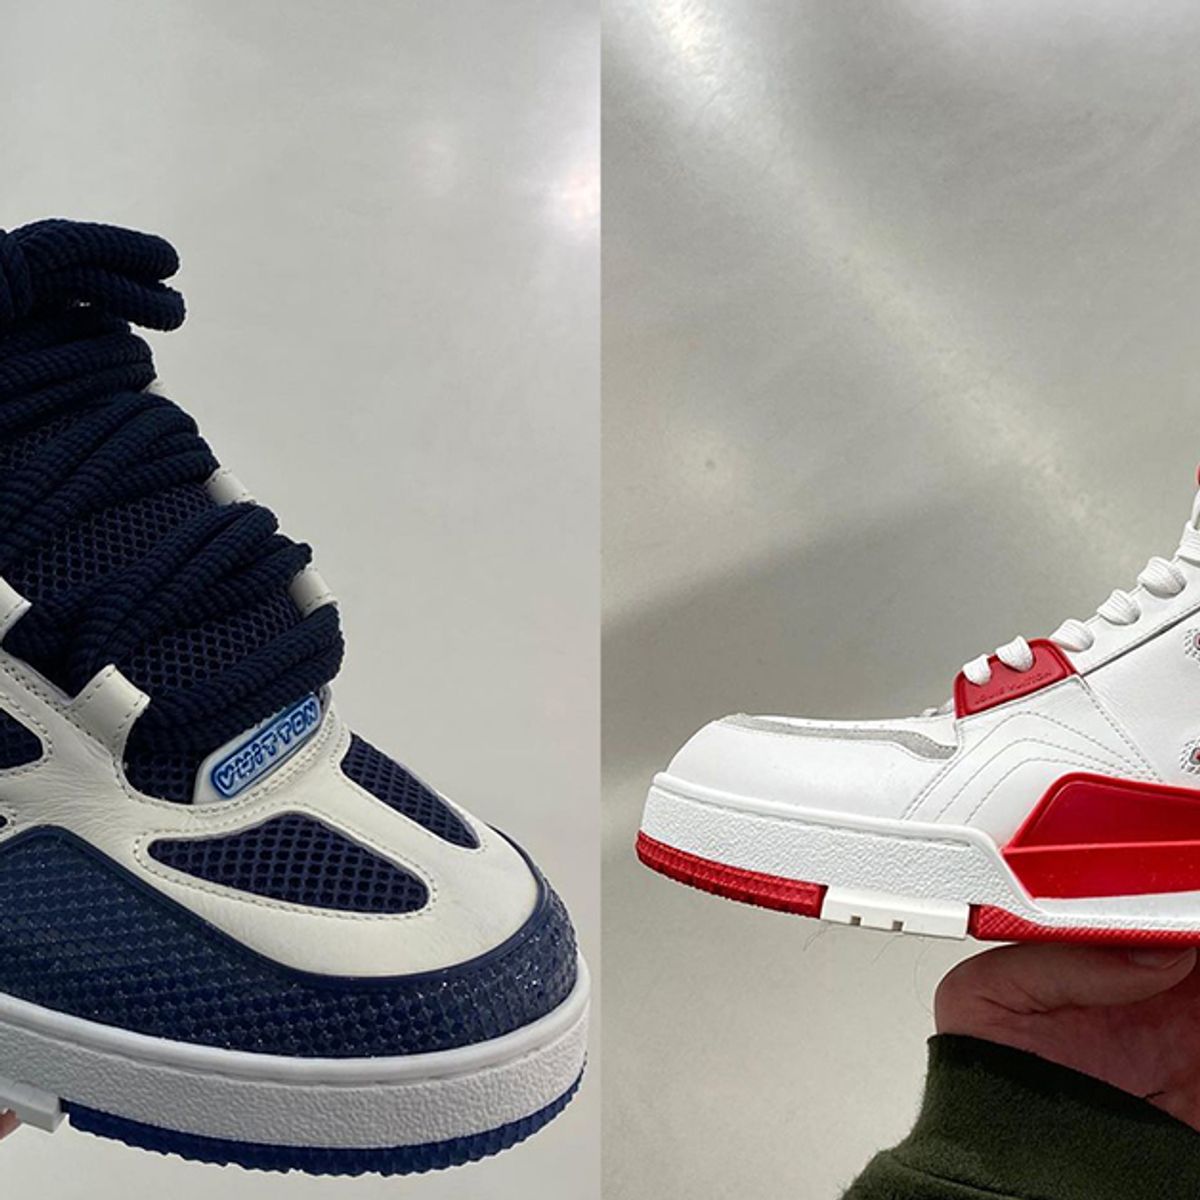 Louis Vuitton High 8 And LVSK8: Release Date, Price, And Where To Buy